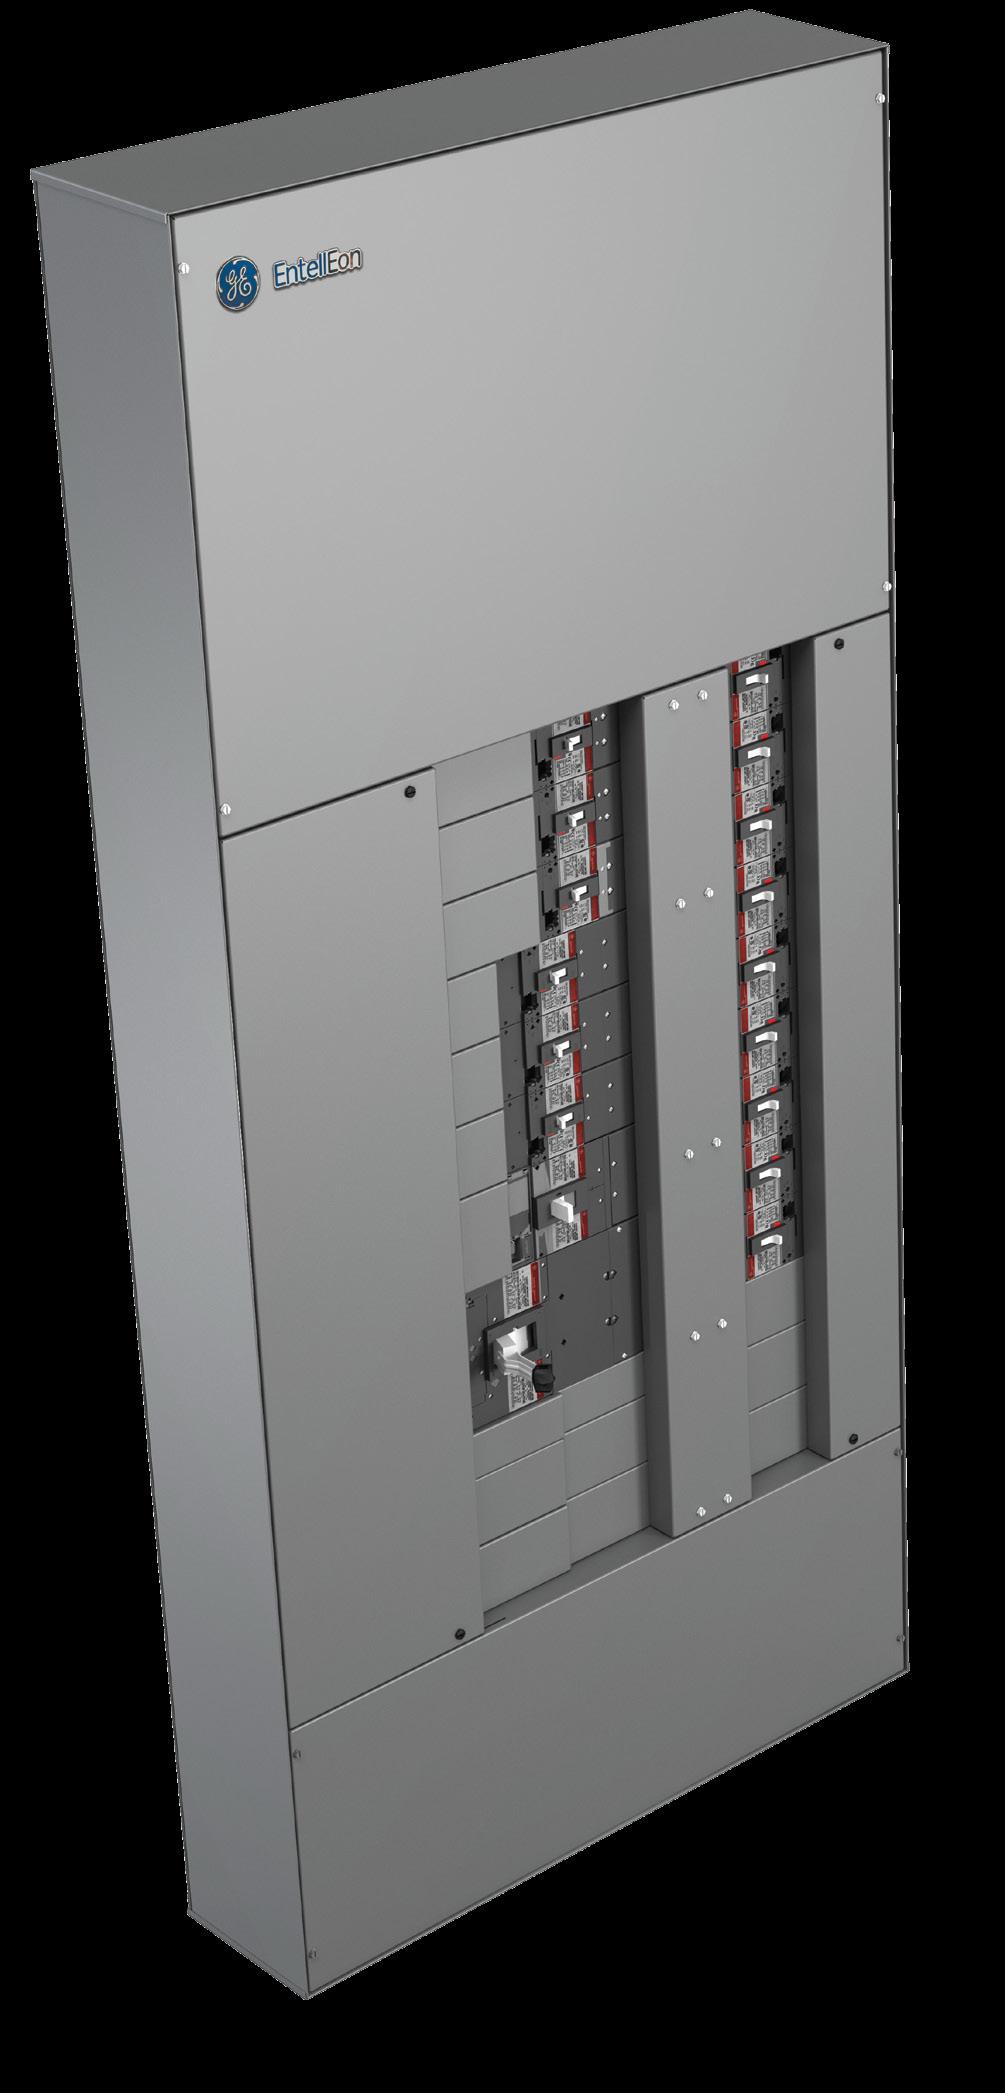 Introducing EntellEon A More Versatile Alternative to Traditional Power Panels EntellEon, the new low-voltage power panel brought to you by GE s Industrial